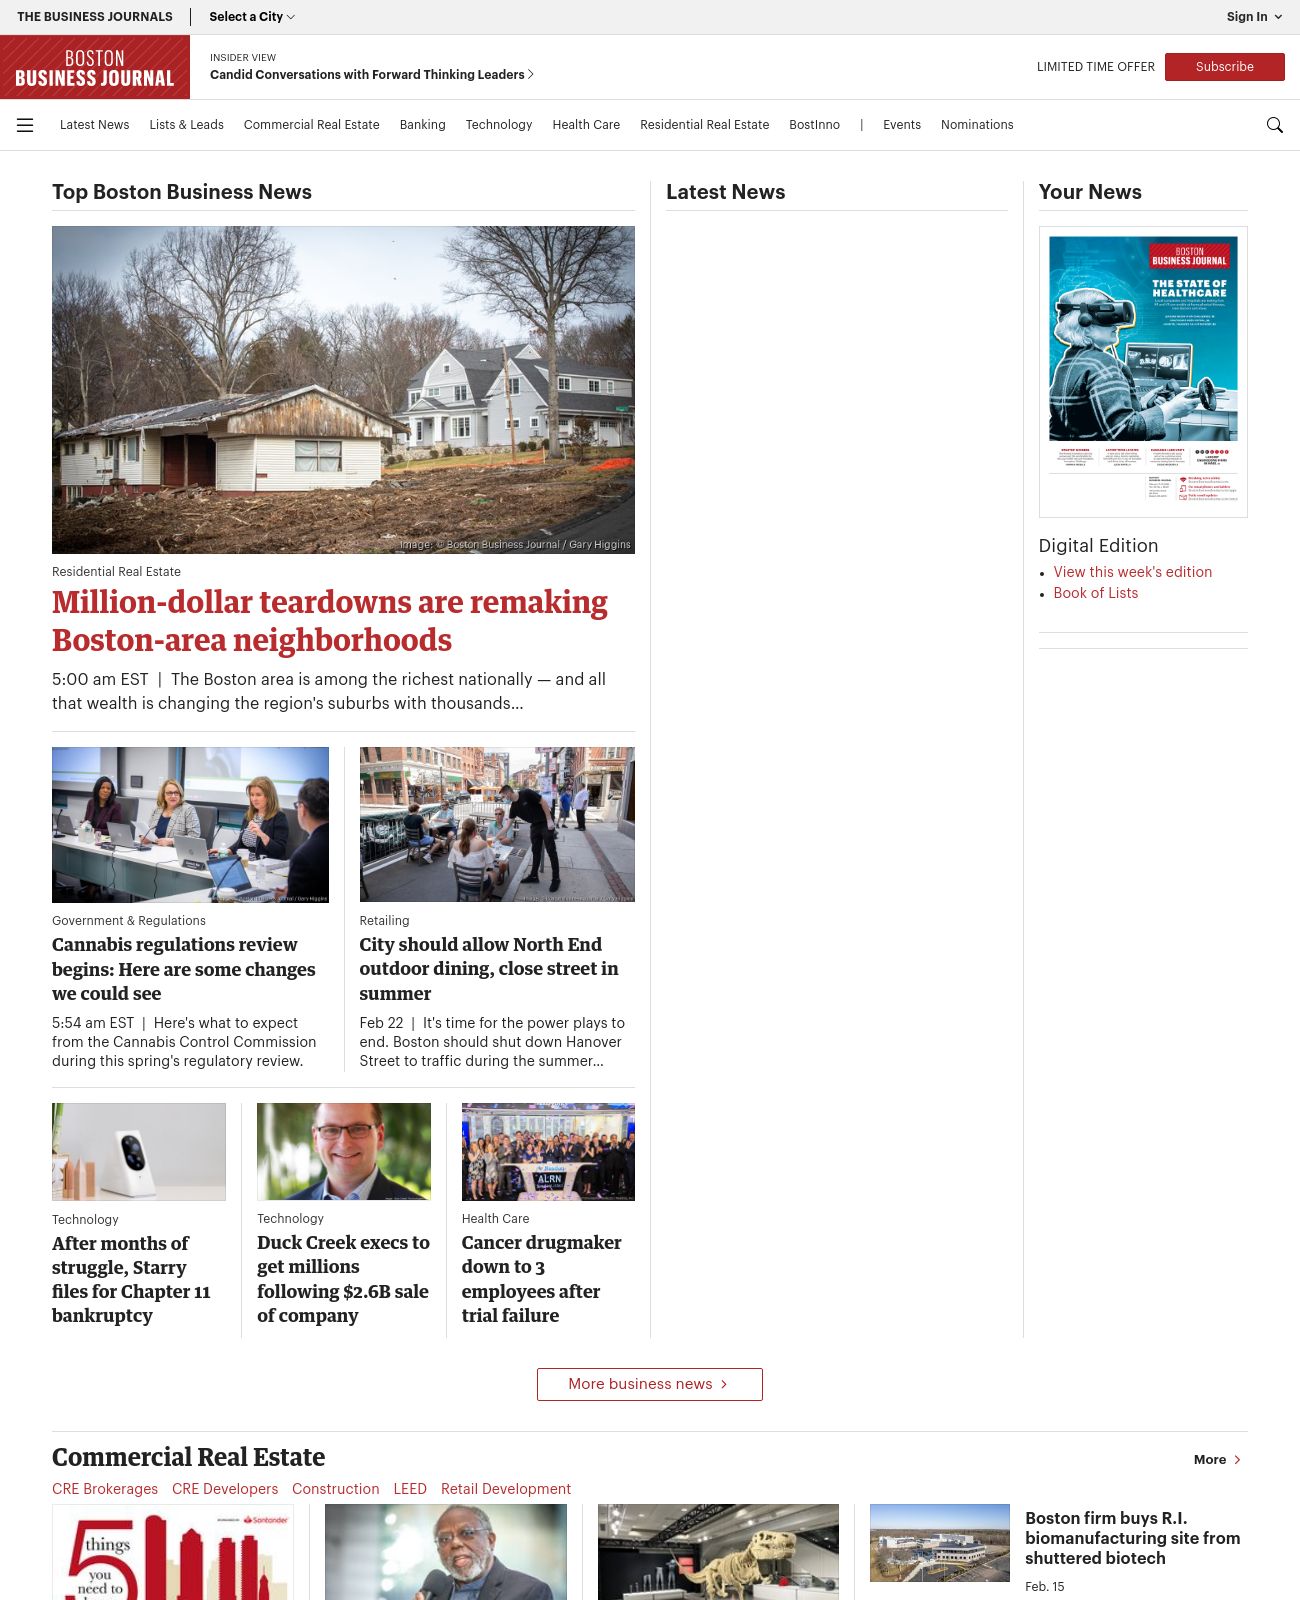 Boston Business Journal at 2023-02-23 07:55:36-05:00 local time